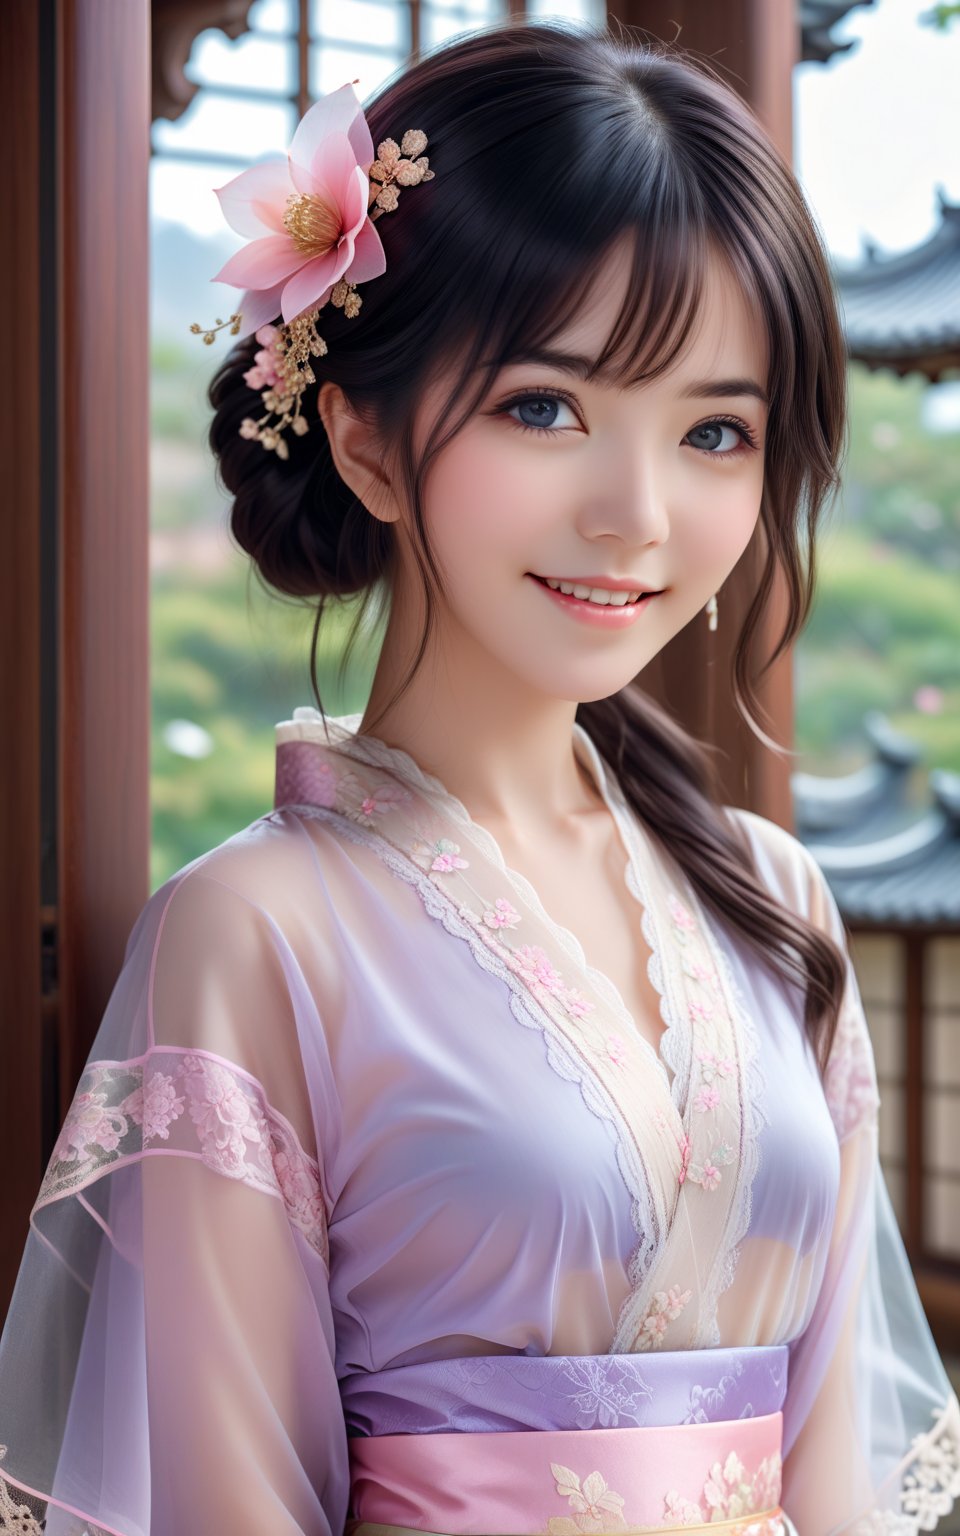 Photorealistic, (Masterpiece, Best Quality), (Intricate Details), Uniform 8k Wallpaper, Ultra Detailed, Beautiful Woman, Dark Hair, Looking at Camera, Smiling and Posing, (Pastel Colors: 1.3), (Lace) dress, beauty and aesthetics, 1girl, detail, solo, victorian mansion, transparent kimono, CCENN, innocent girl, beautiful eyes girl,cen cute